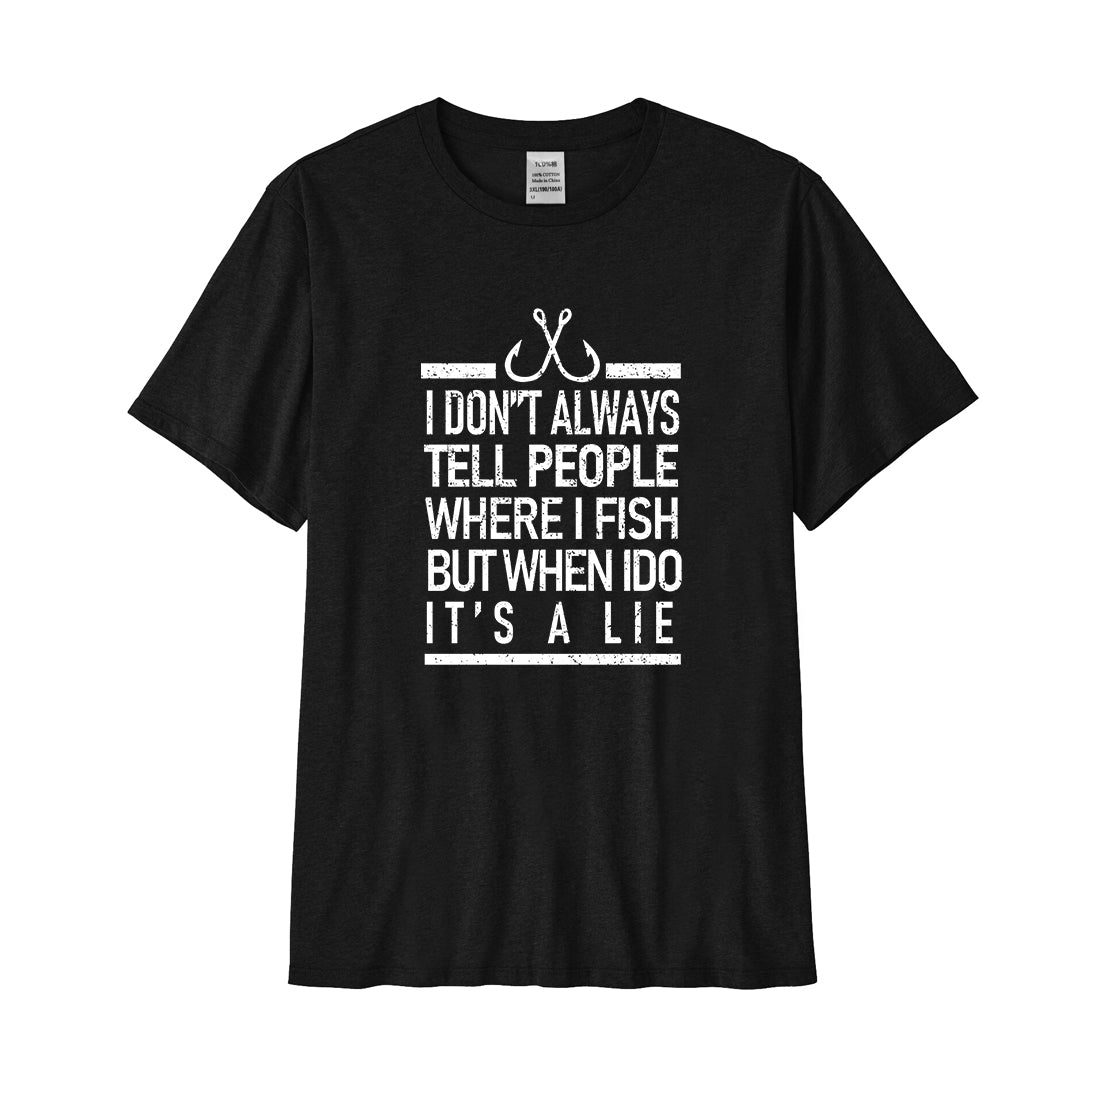 NOT TELL PEOPLE WHERE I FISH Performance T-Shirt